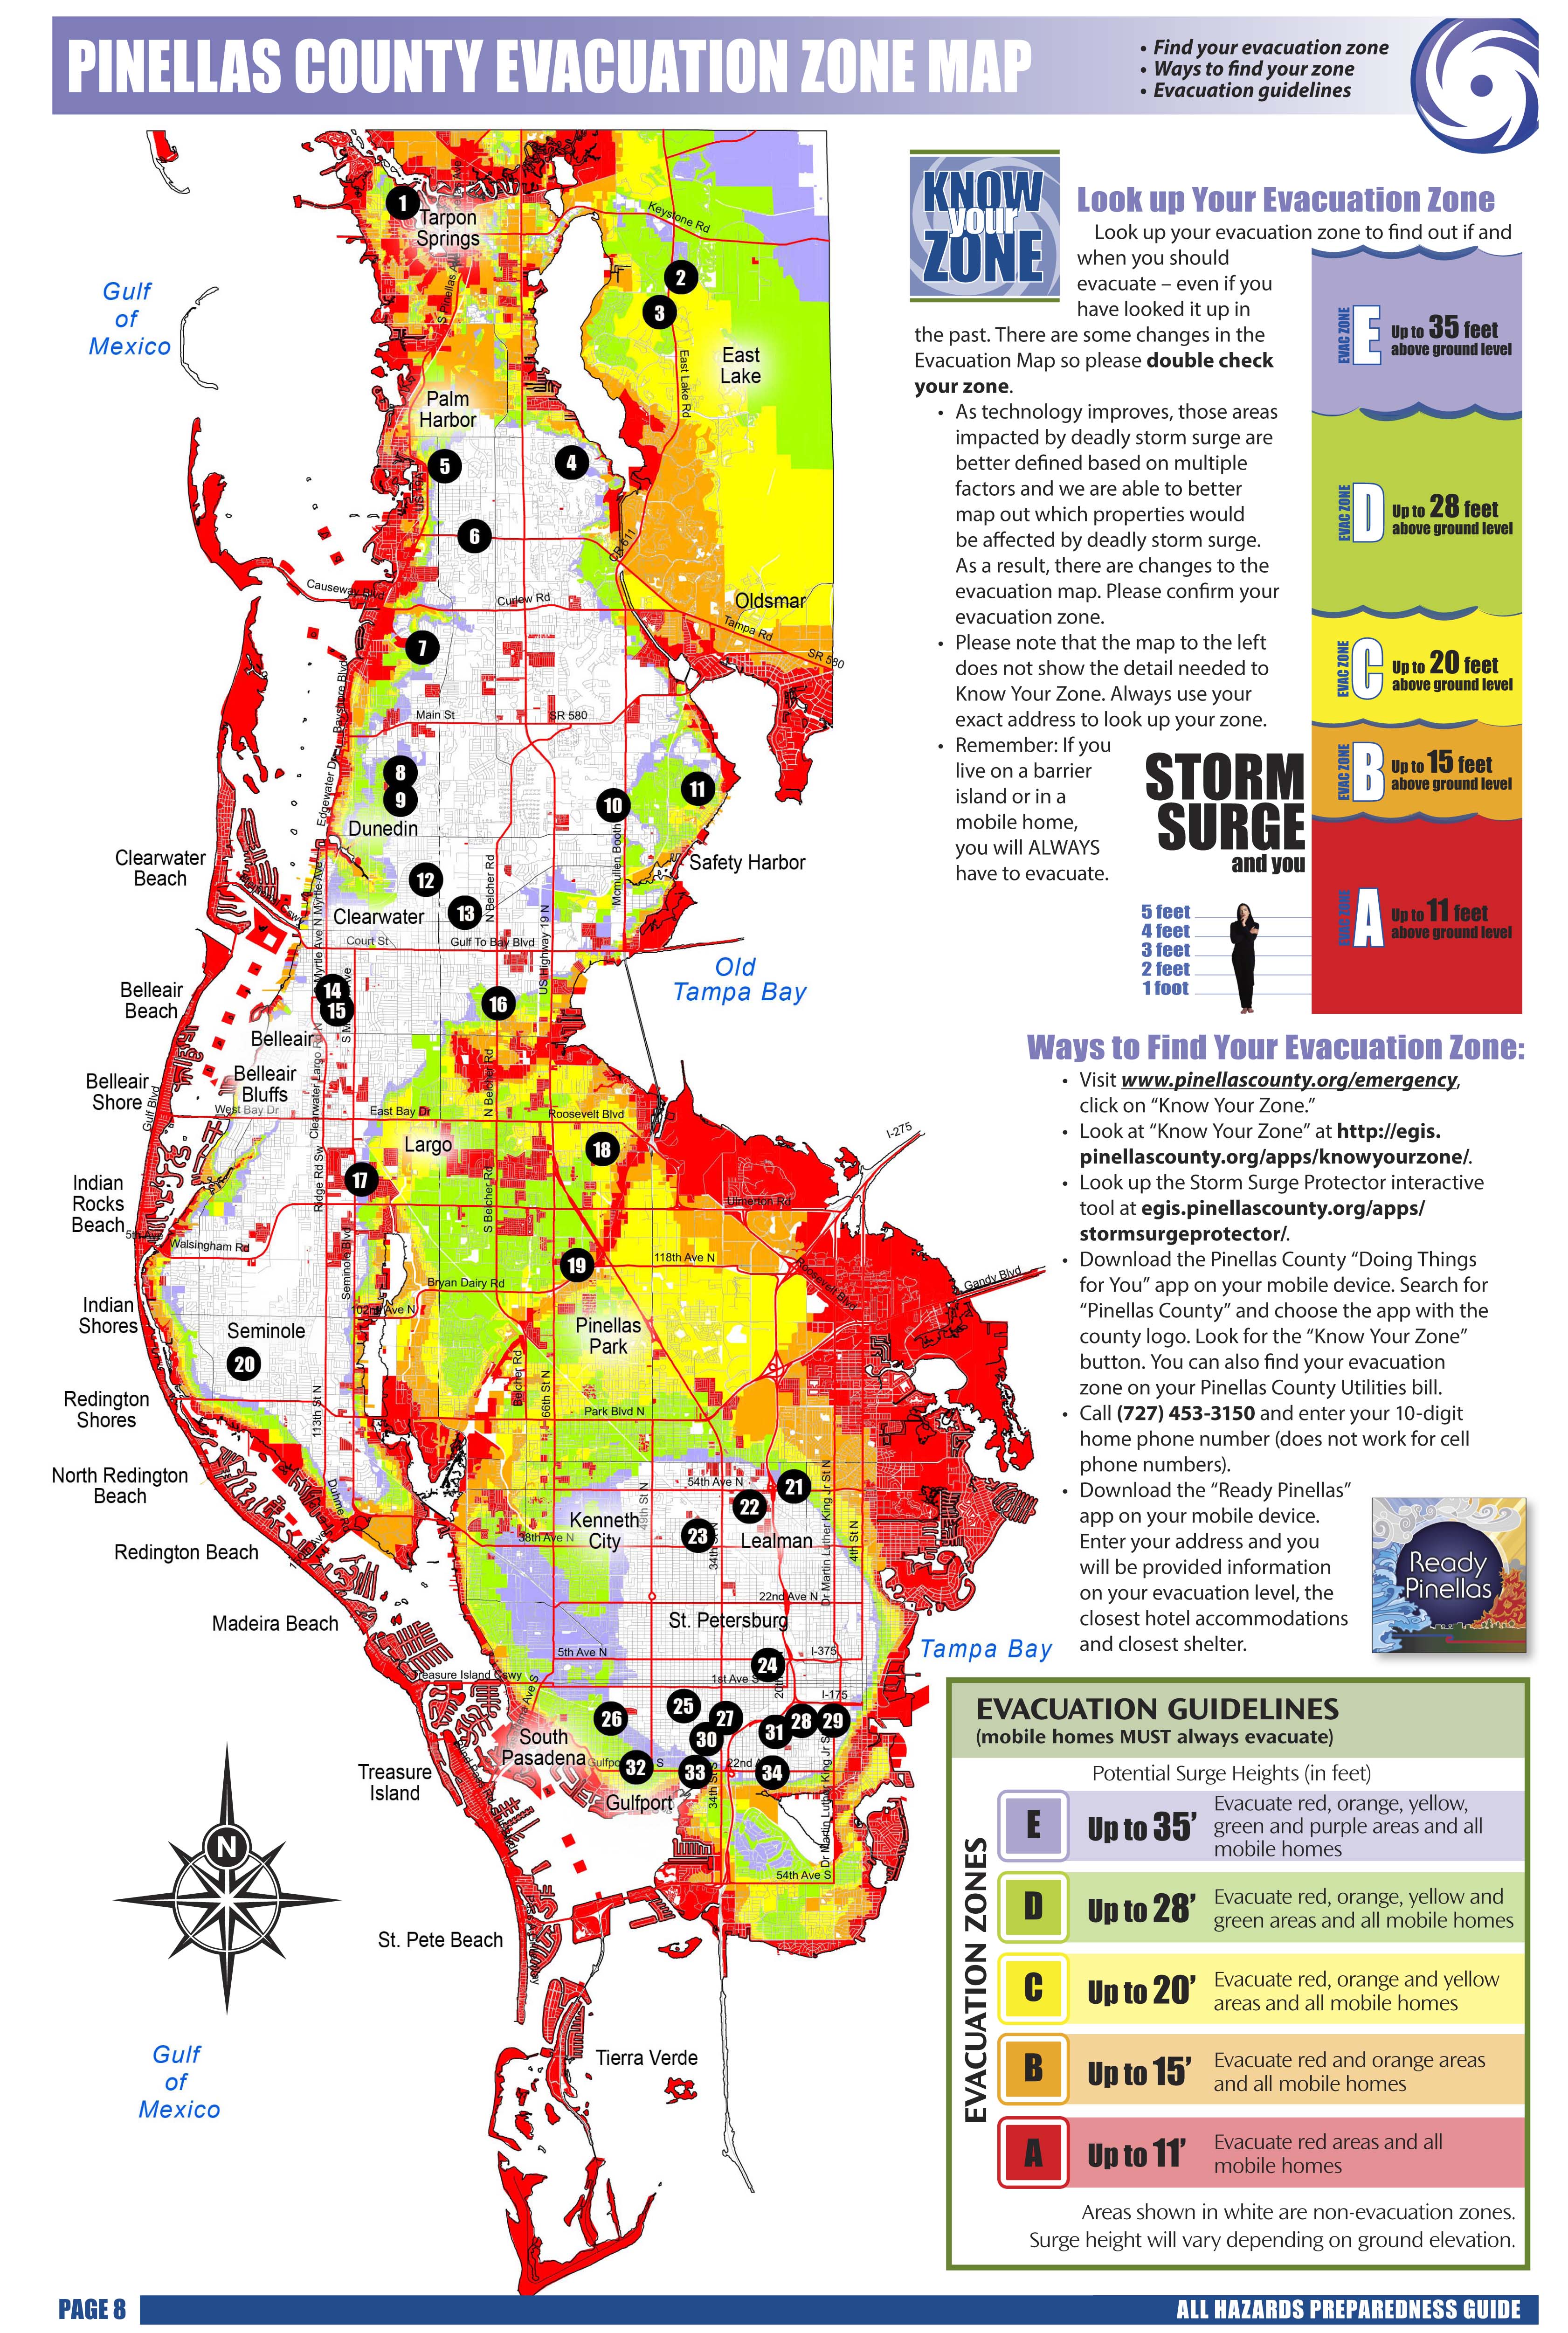 st-petersburg-s-campbell-park-to-host-south-pinellas-solar-power-info